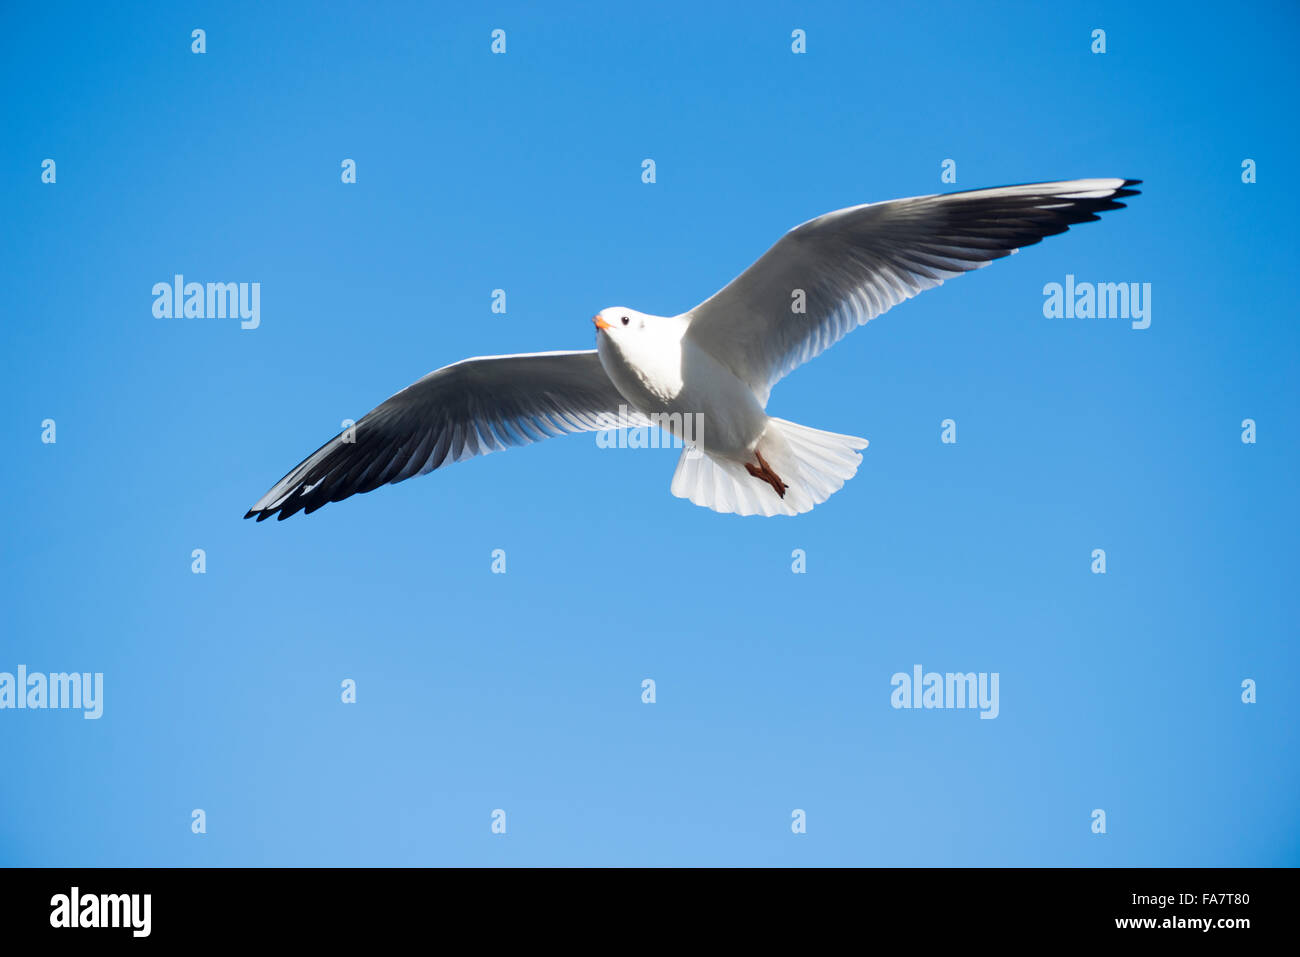 Flying seagull over the water Stock Photo